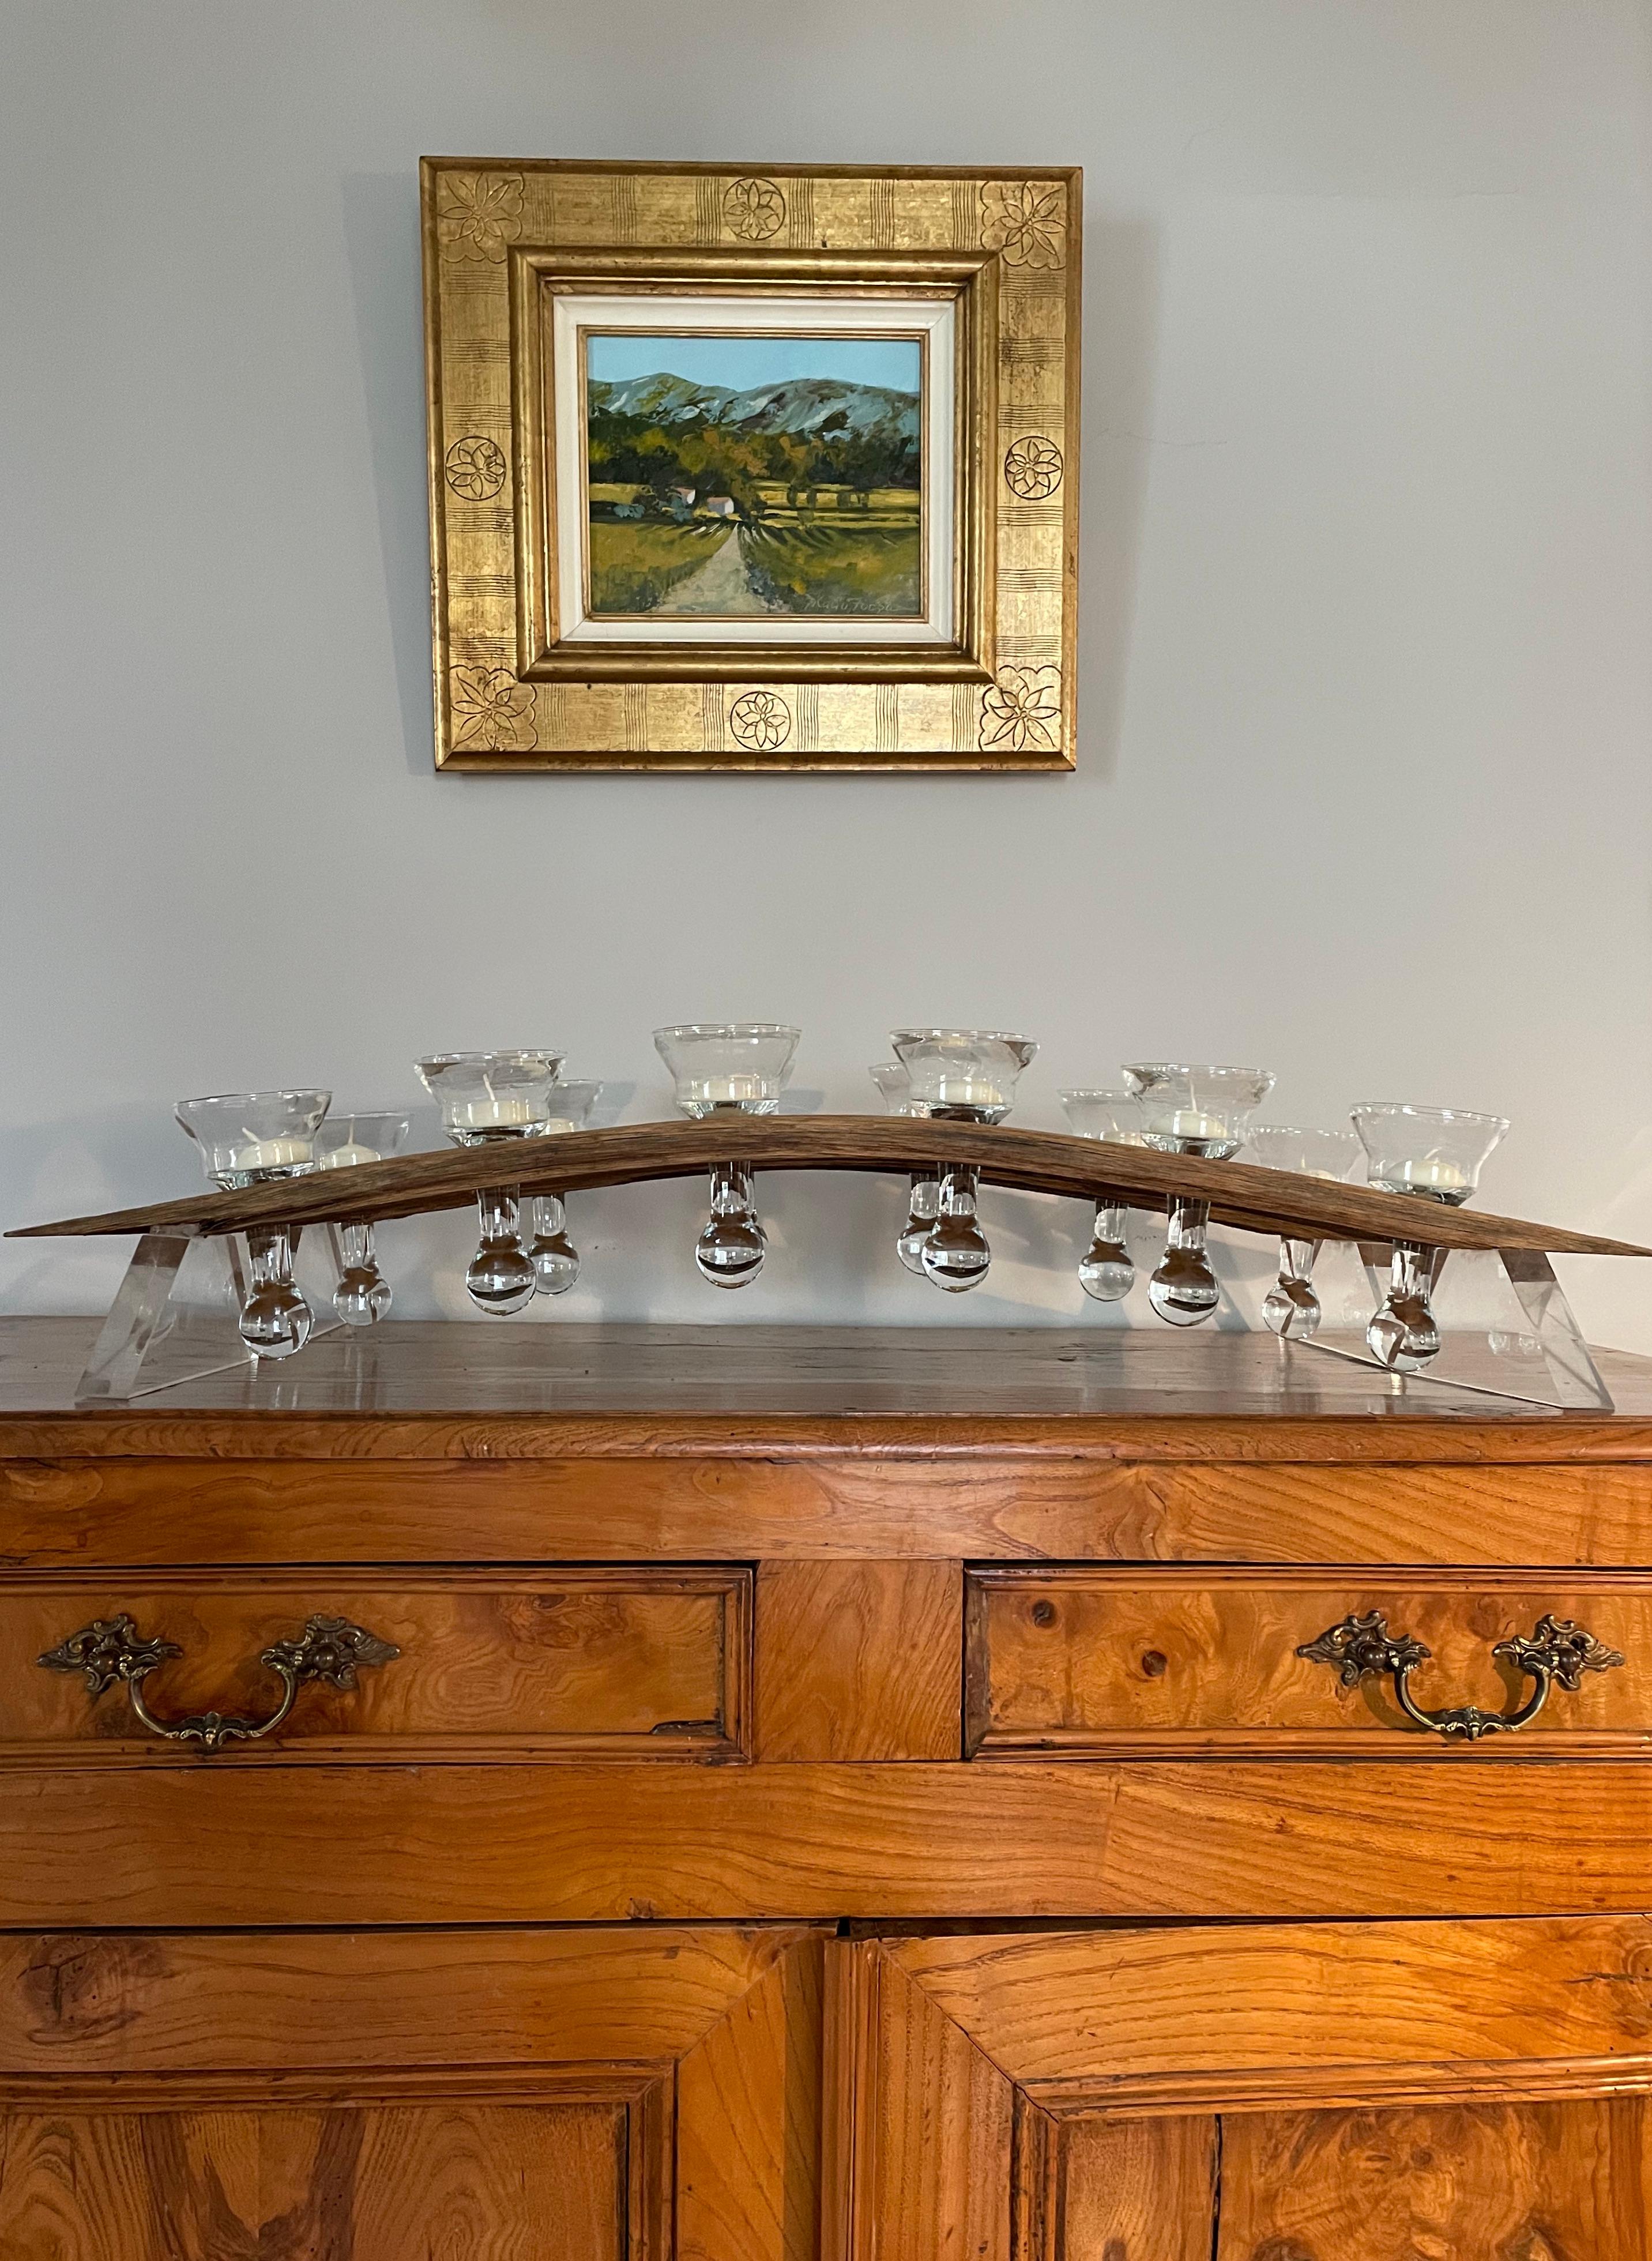 Occasionally we find wild and wonderful things on our buying trips and these are particularly enticing. Made from oak barrel staves and integral plexiglas stands on either end, each candelabrum features 6 weighted and stemmed drinking glasses that